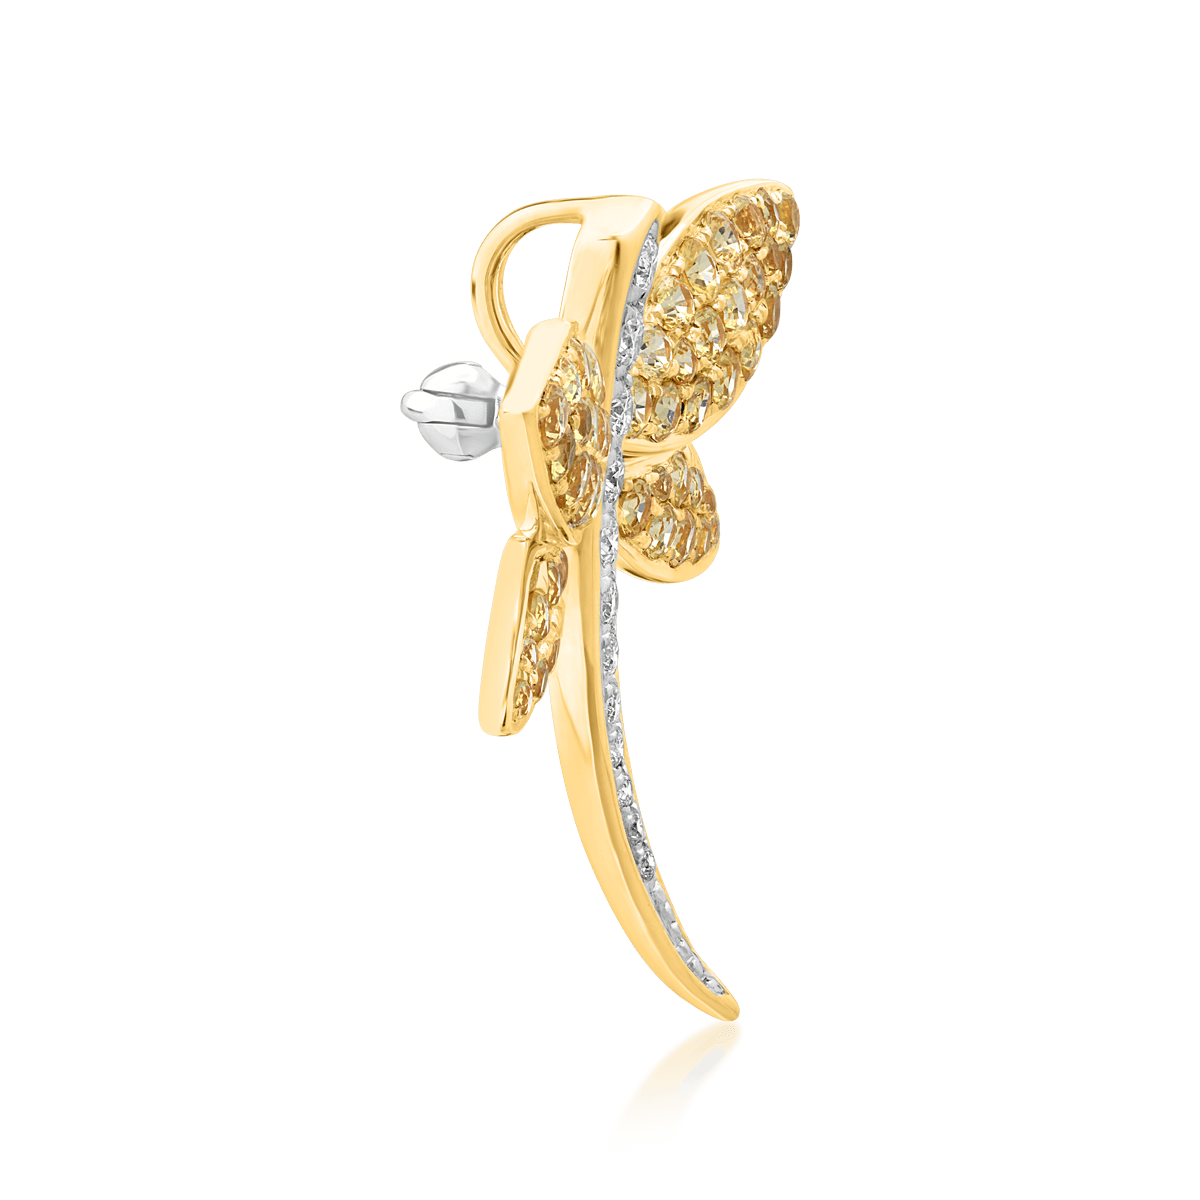 18K white-yellow gold brooch with 1.72ct yellow sapphires and 0.2ct diamonds